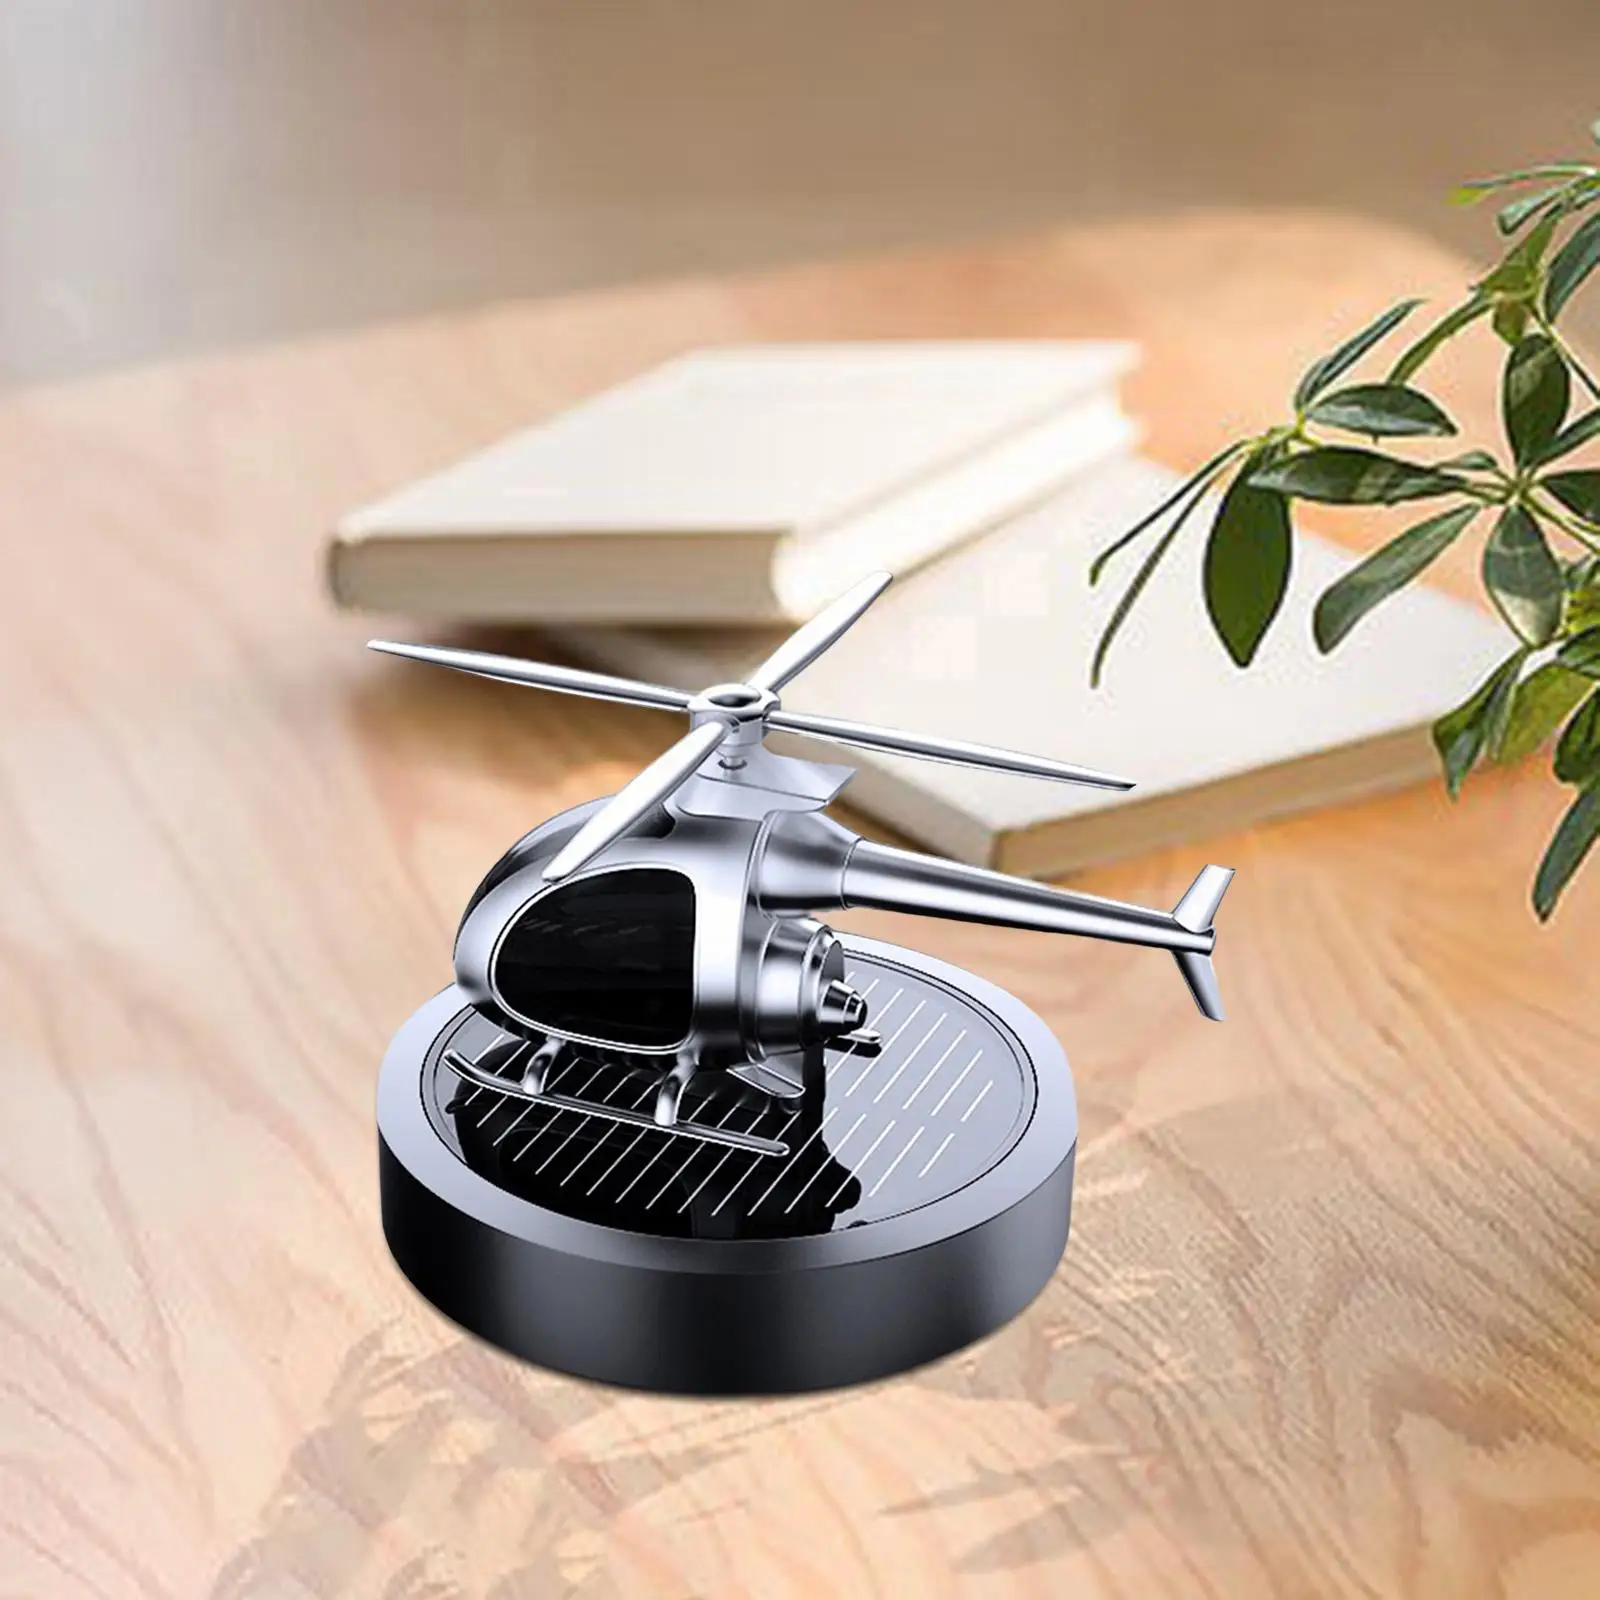 Solar Car Air Freshener Essential Oil Diffuser Helicopter Model Stylish Creative Small for Car Vehicles Office Desk Decoration